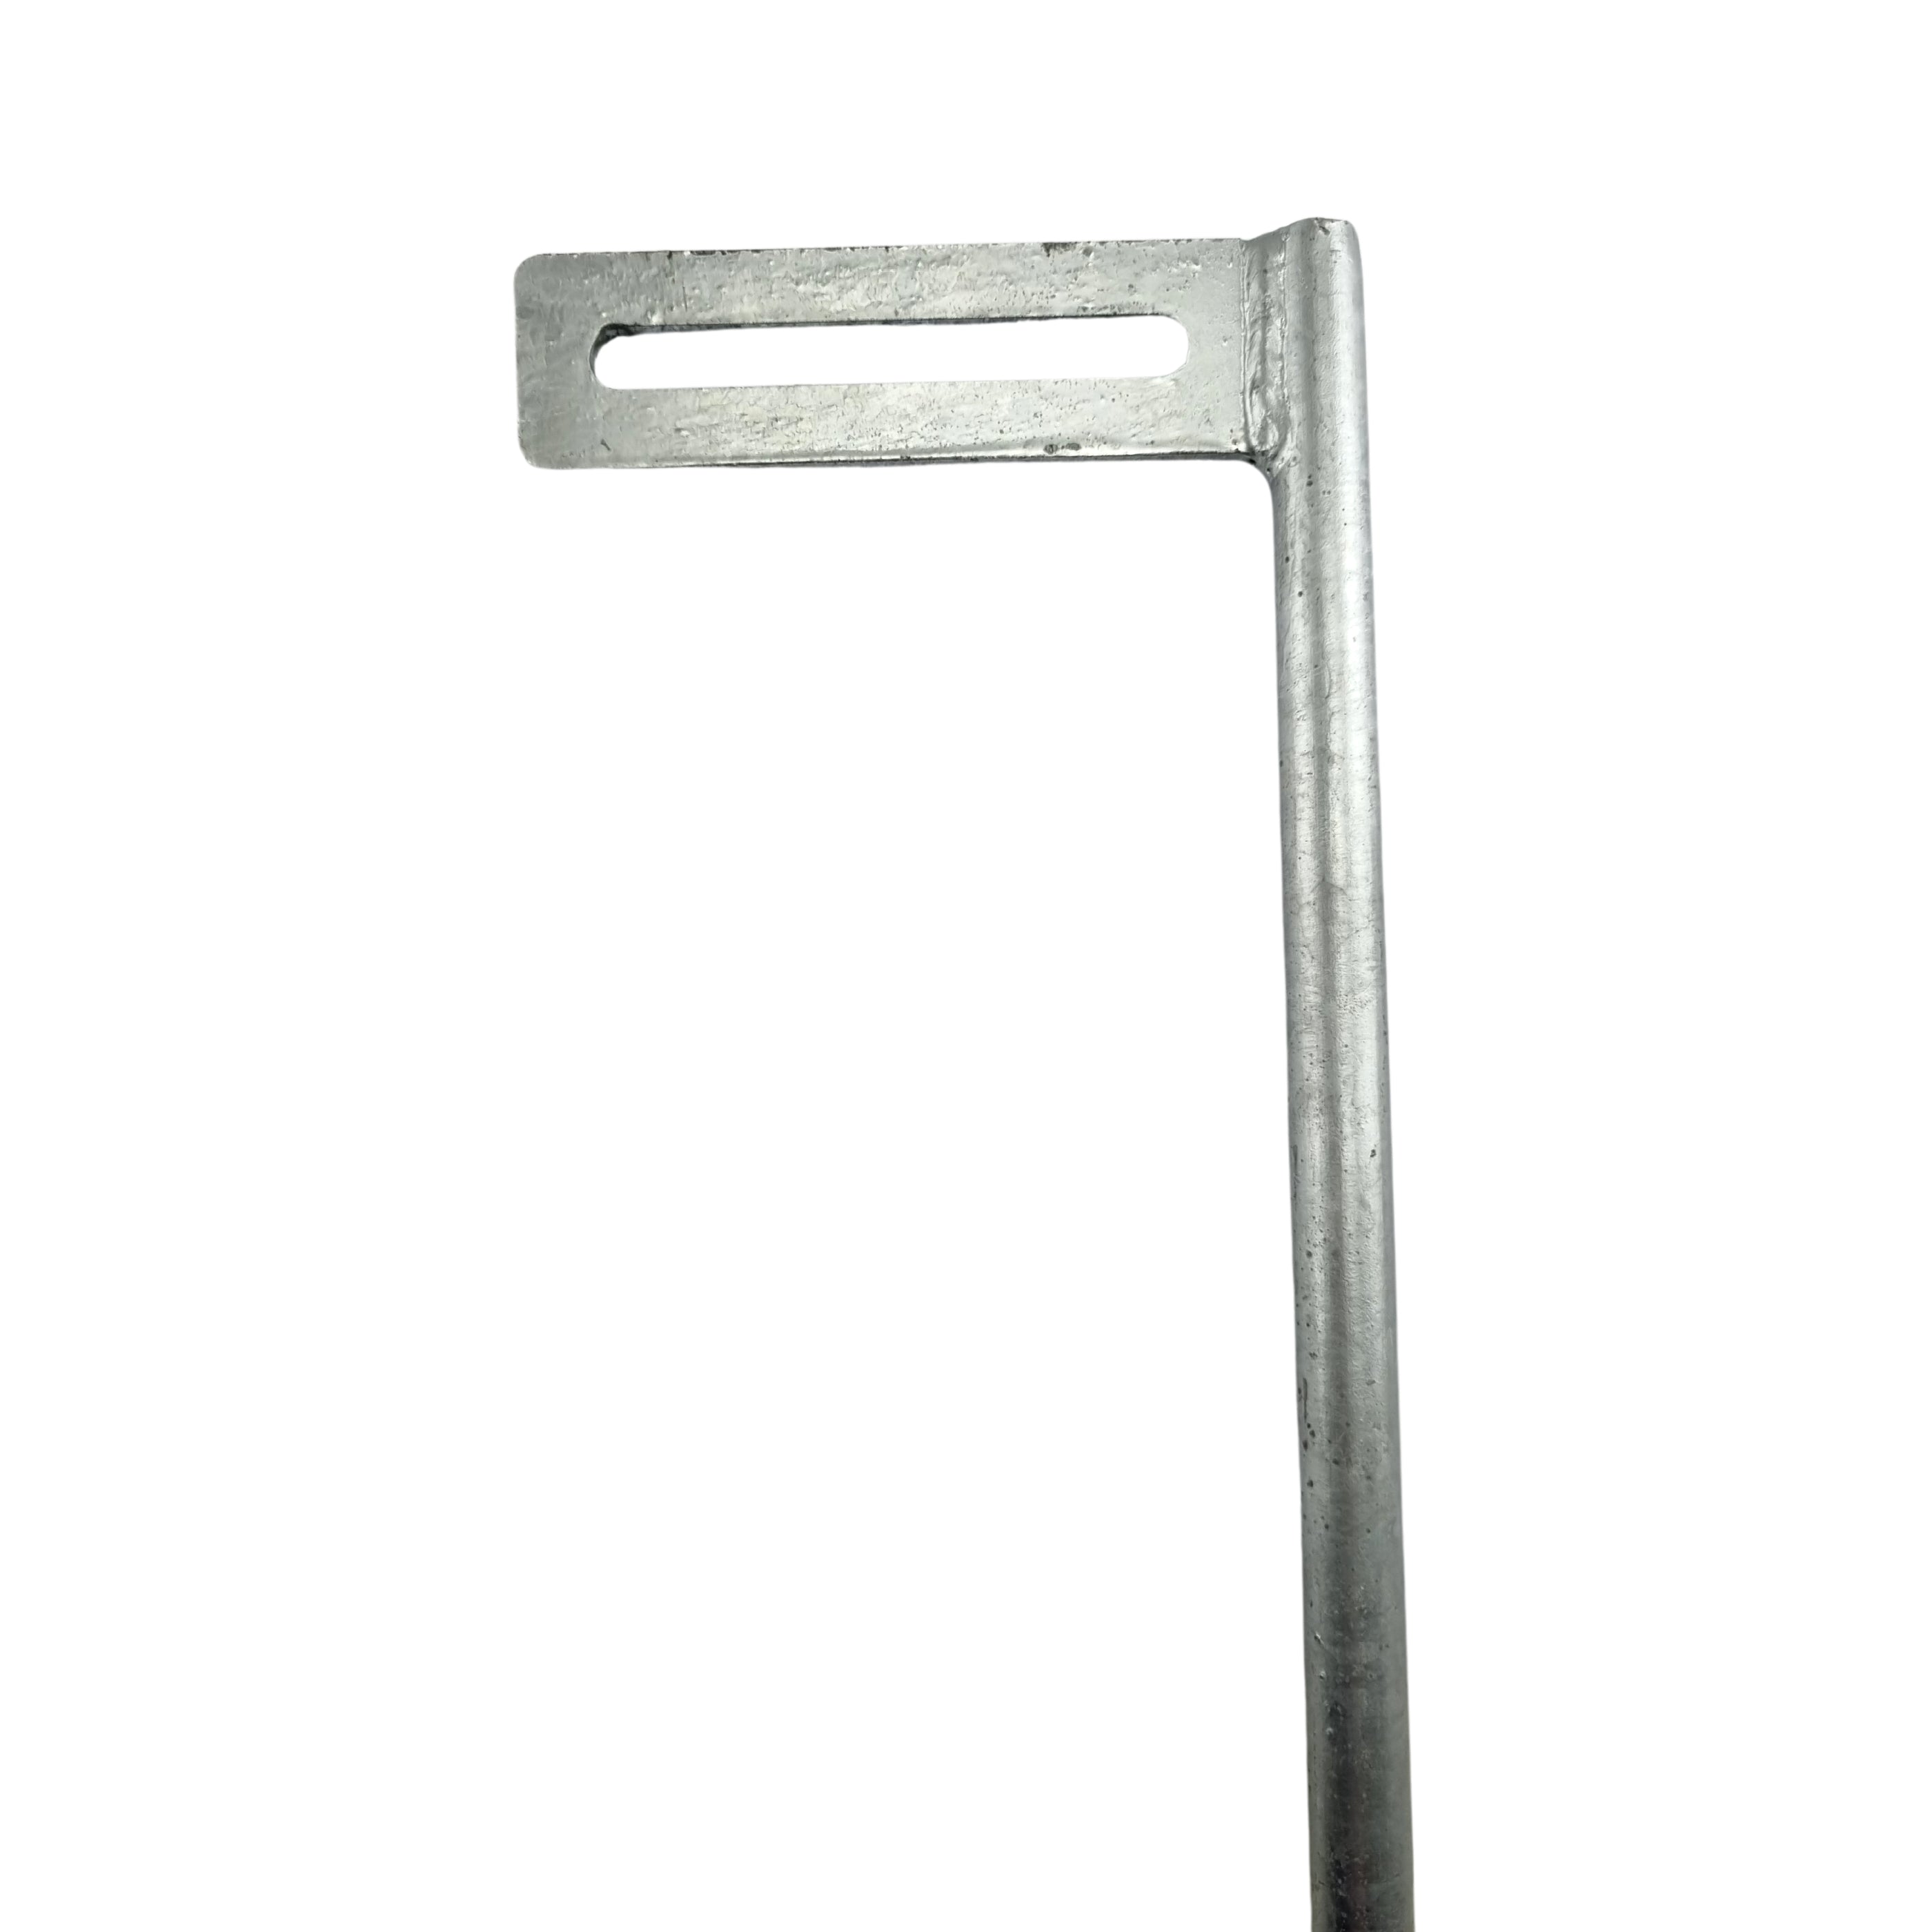 Security Drop Bolt - Galvanised. Australian Made. Australia wide shipping + Melbourne pick-up. Shop Fence and Gate Fittings: Chain.com.au